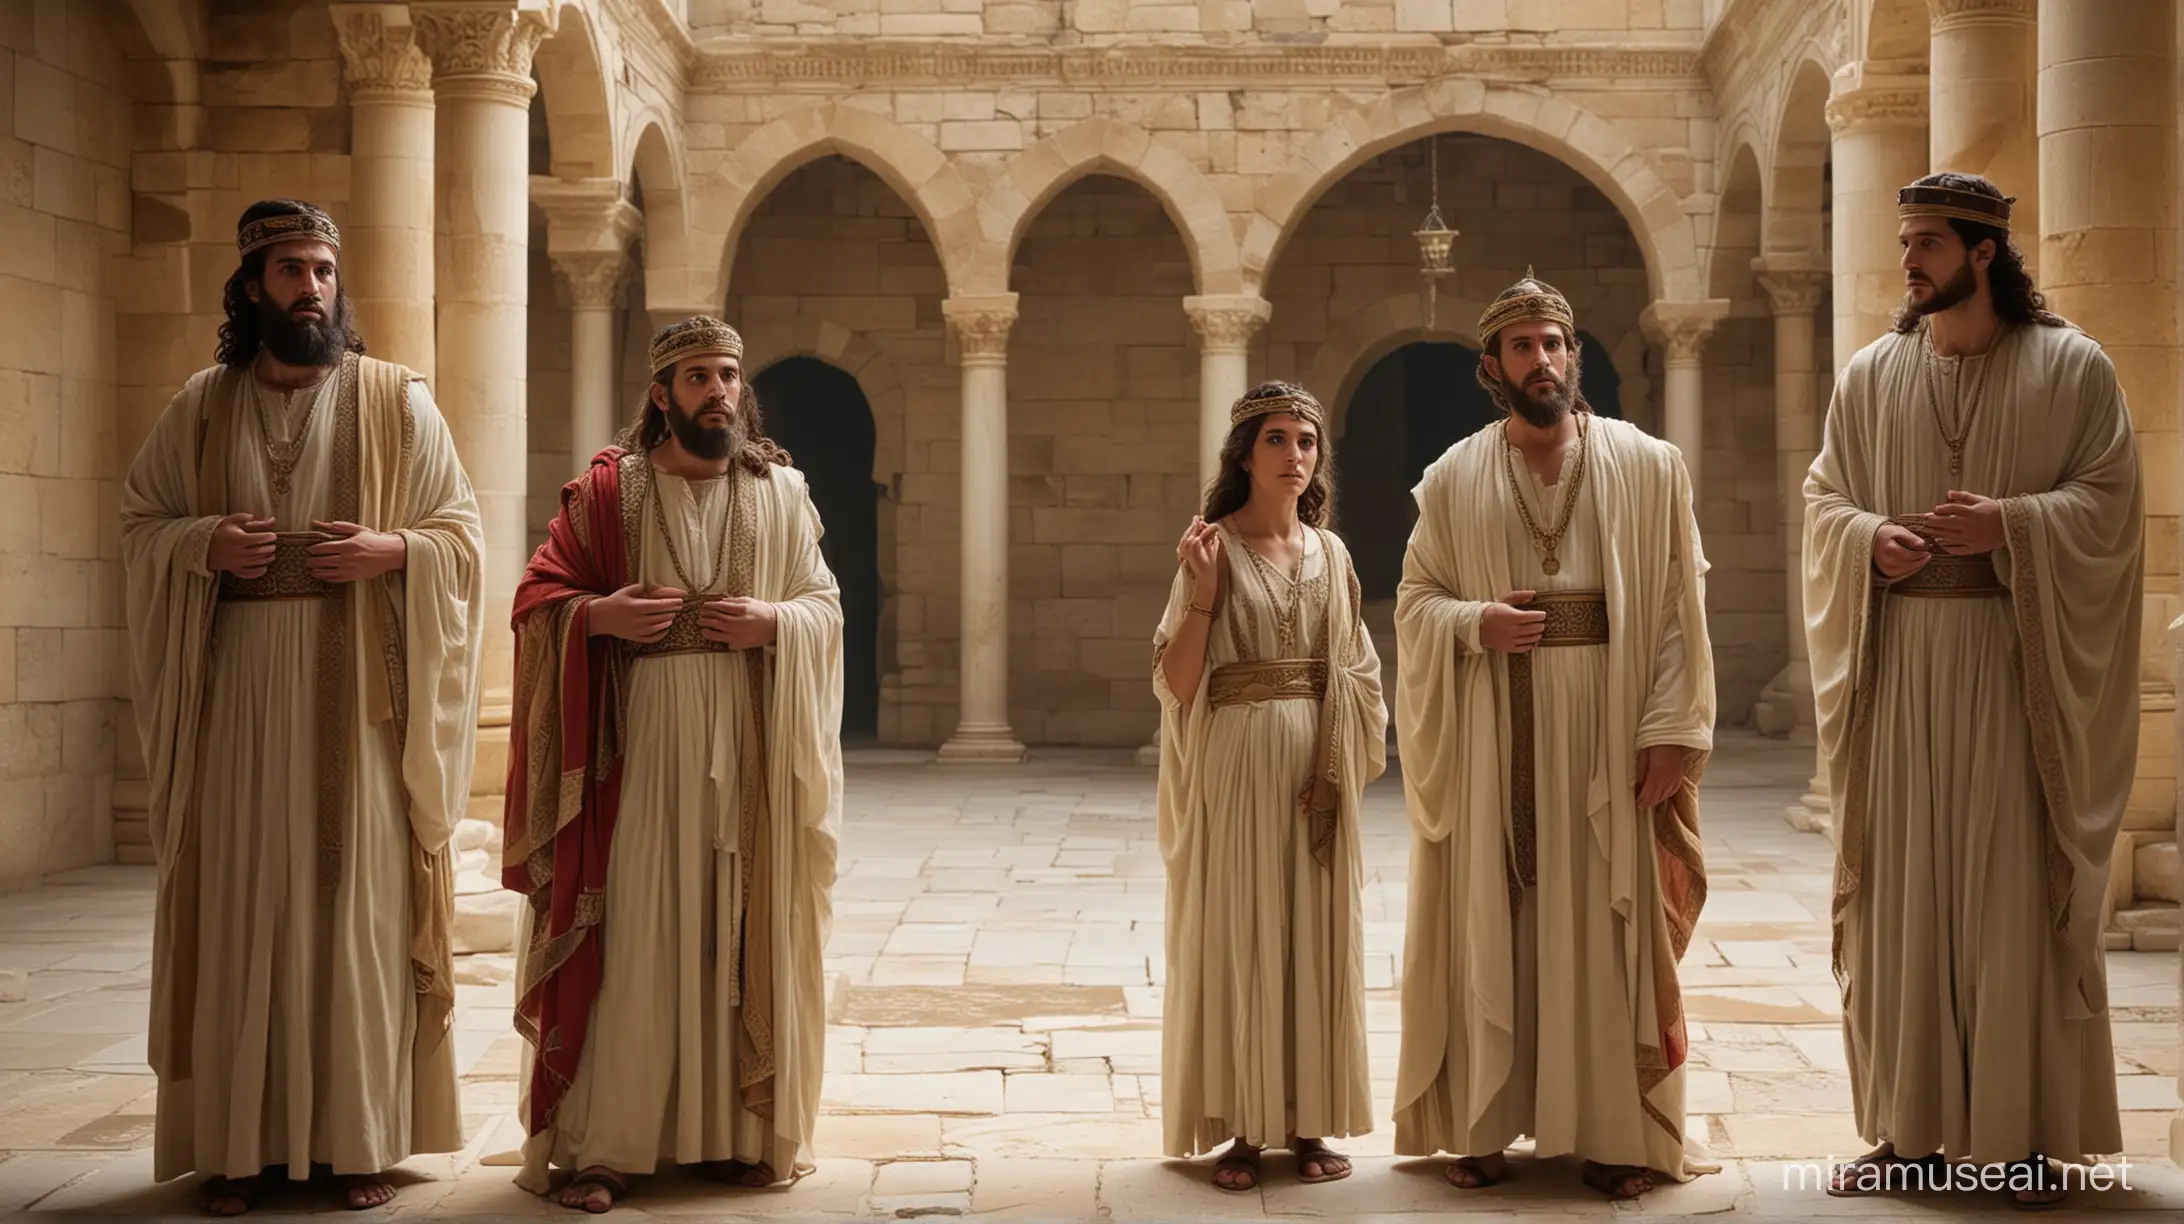 The three sons of King Herod the Great with her sister Salome are inside a Palace in Jerusalem in the 1st century, they are in their 30s and they look worried